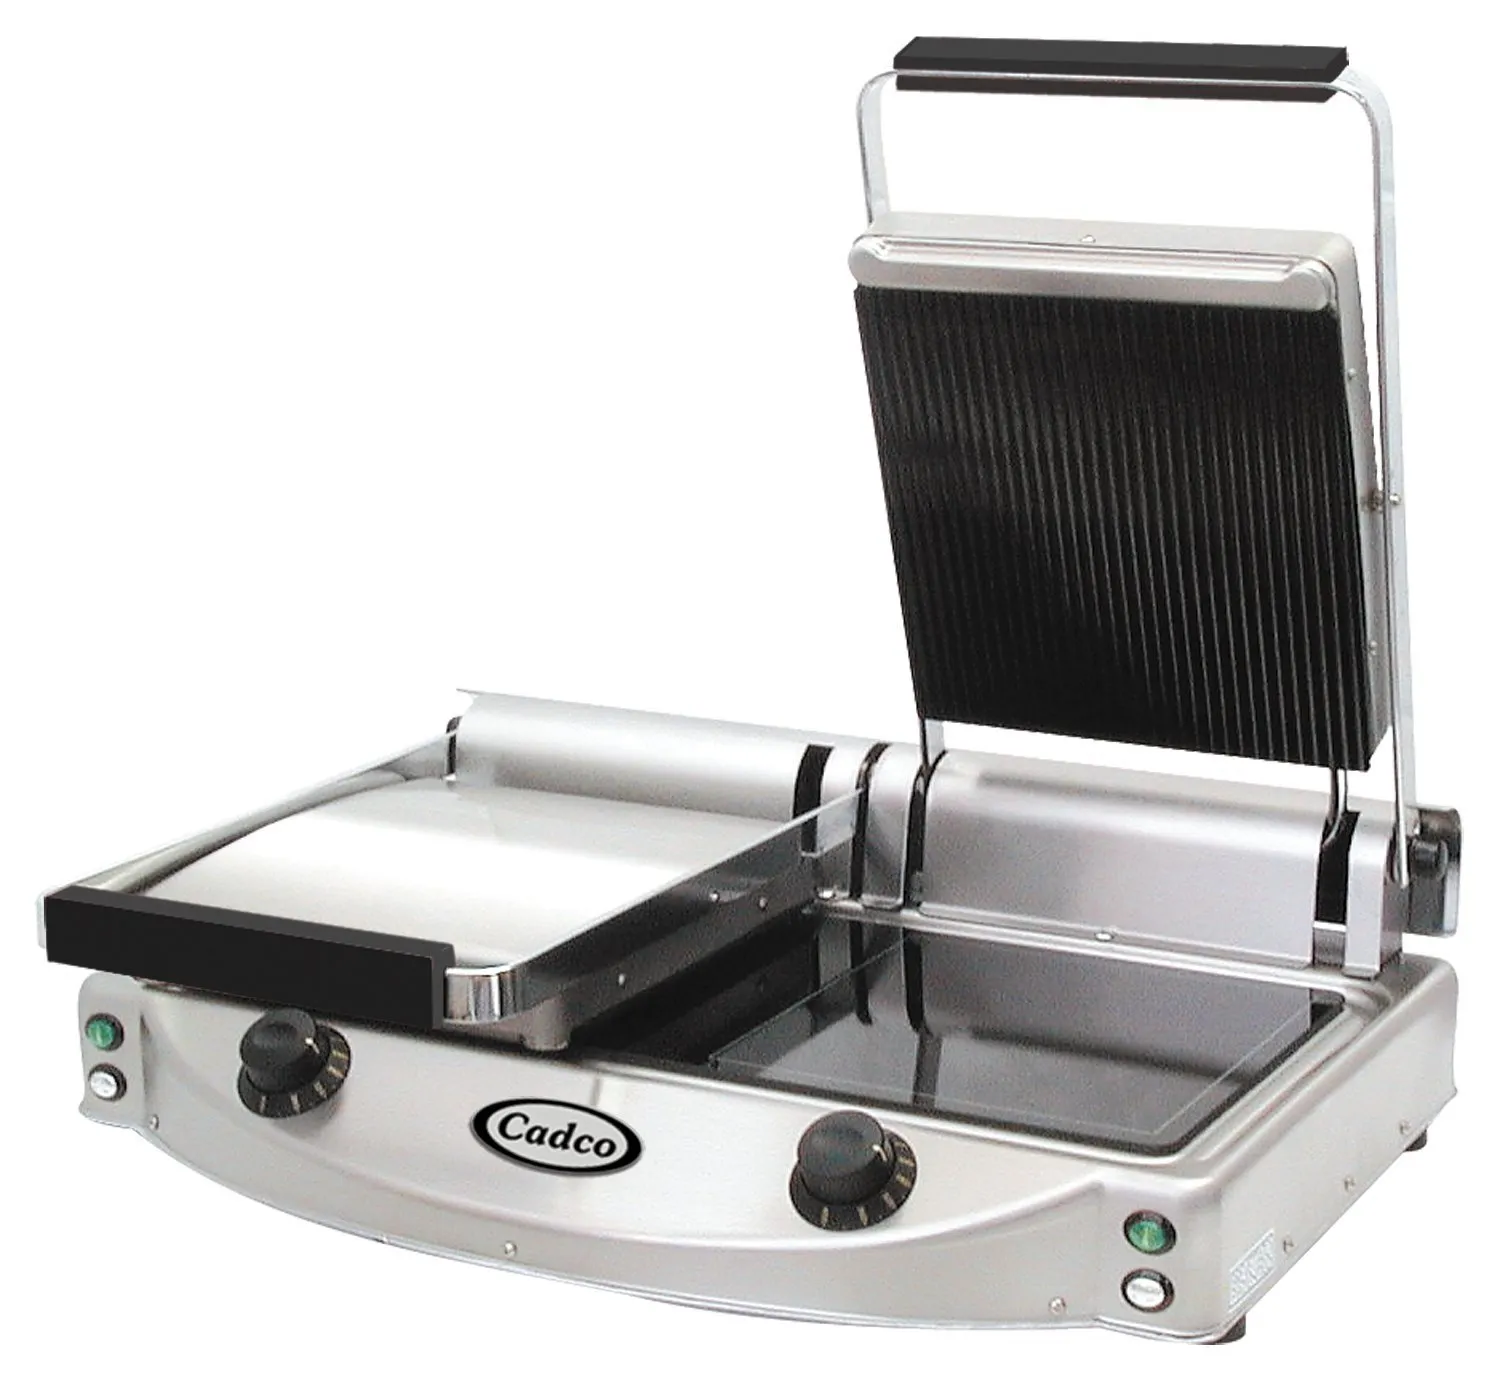 Cadco - CPG20 - Glass Ceramic Panini / Clamshell Grill - Double